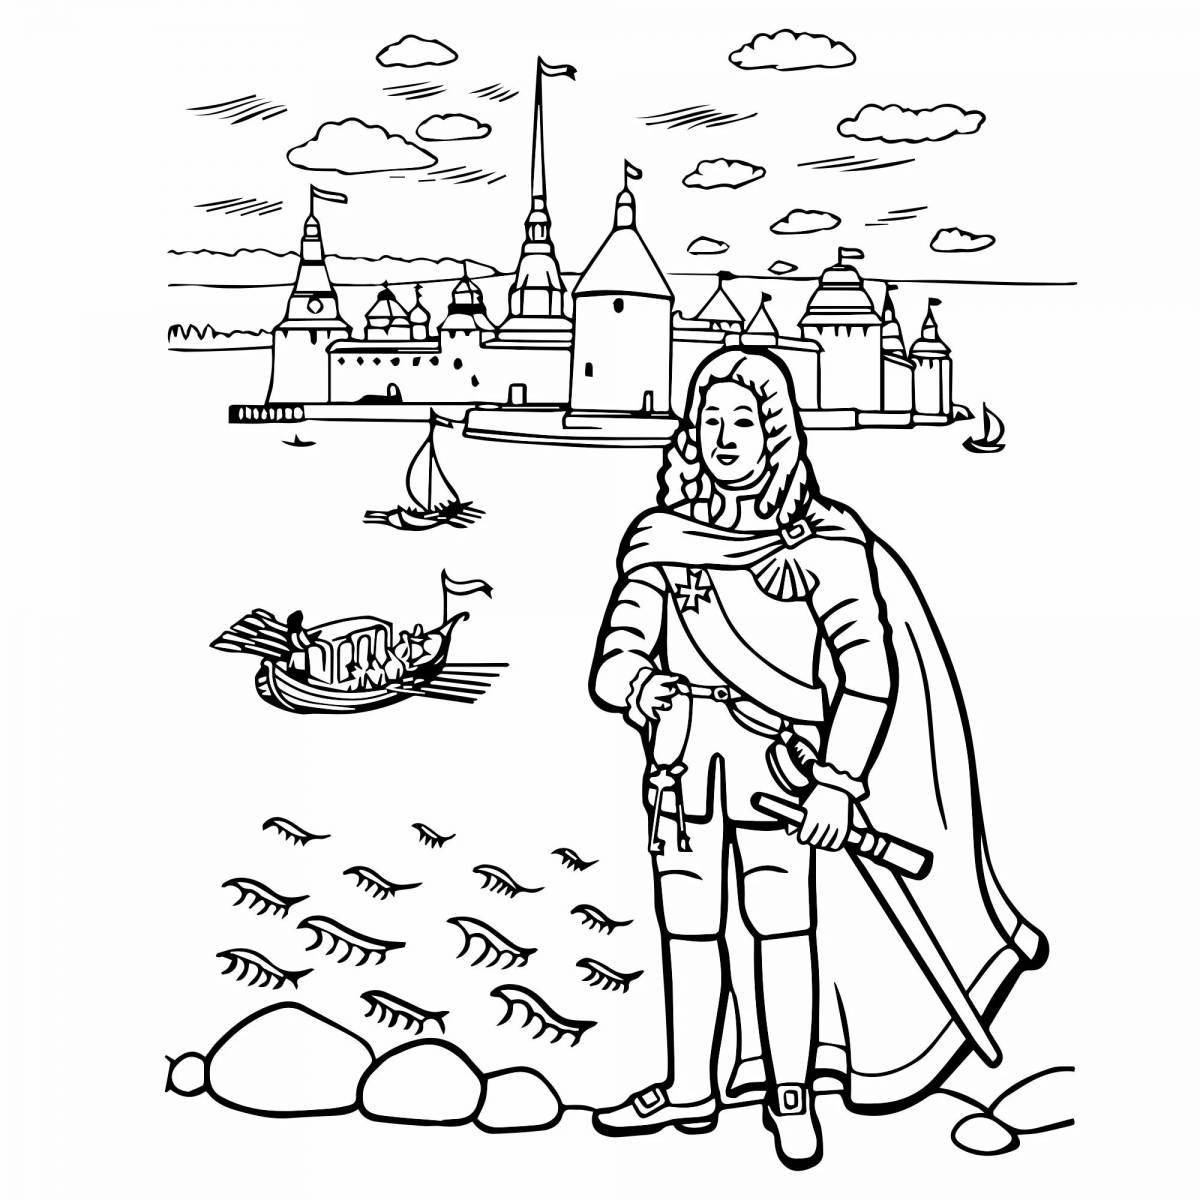 Mystical peter the first coloring book